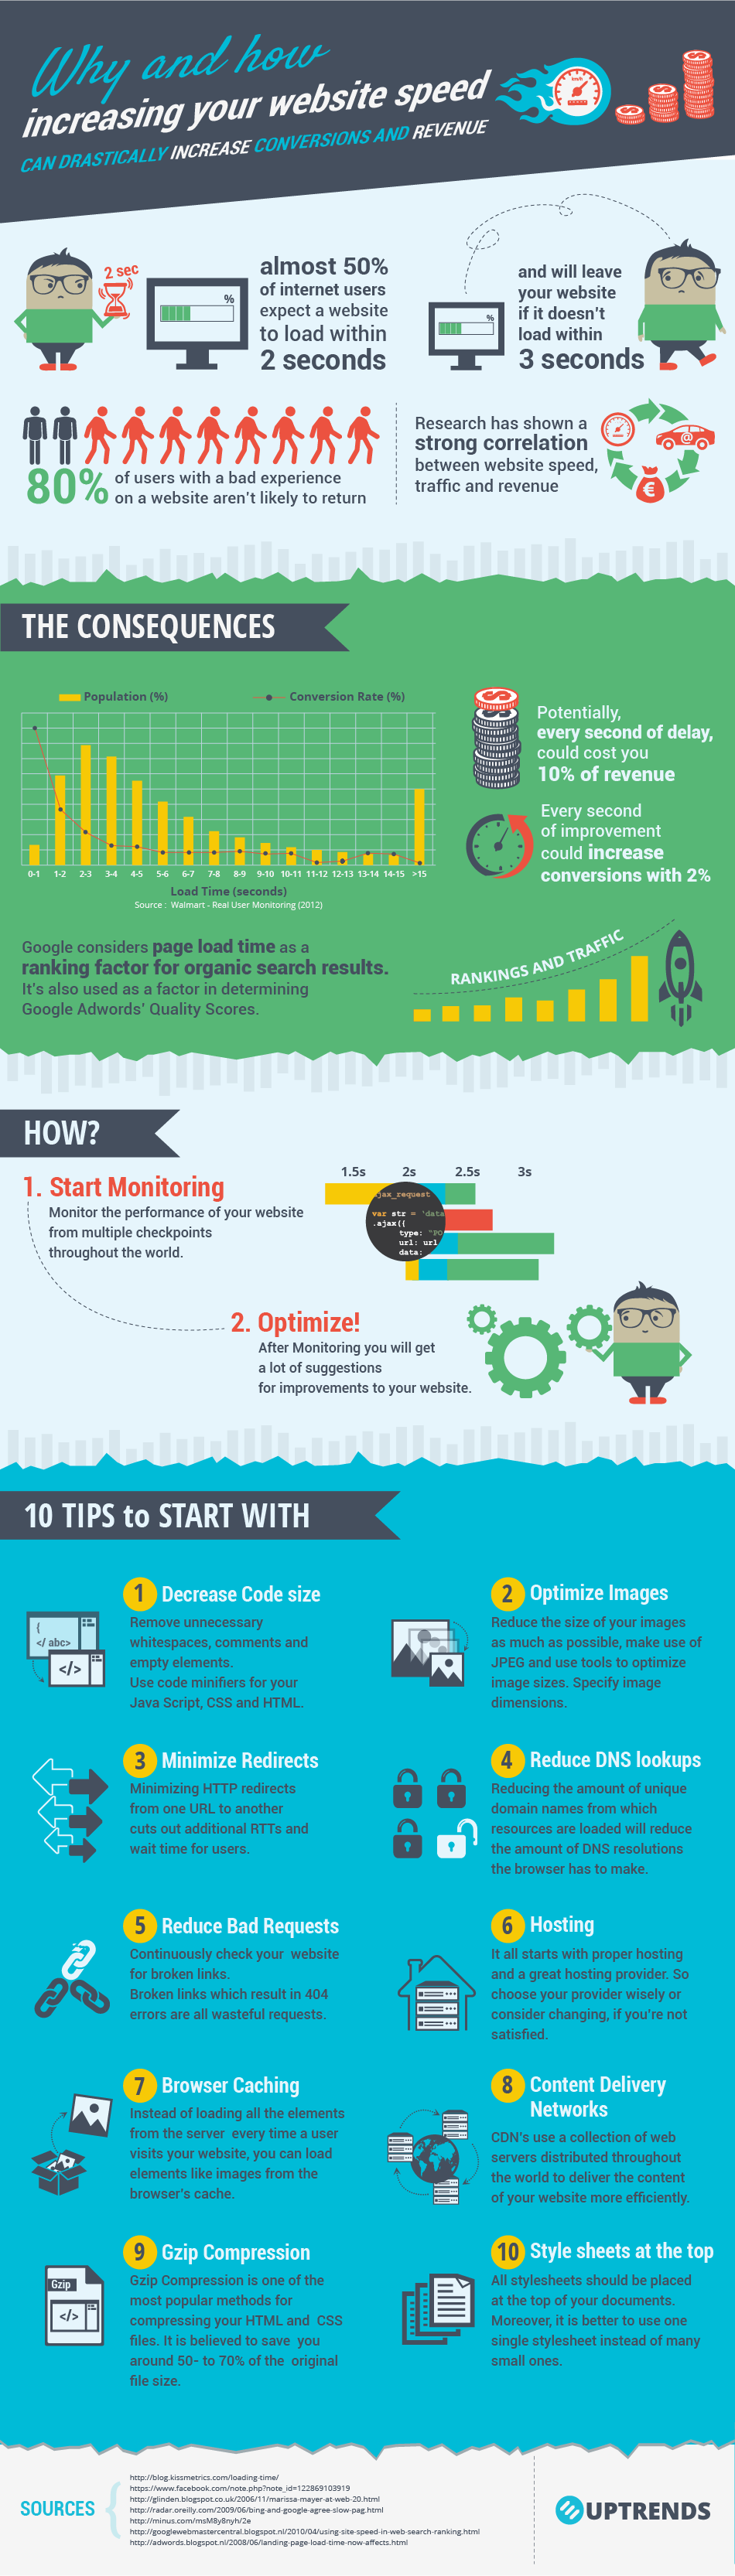 Uptrends_infographic-01